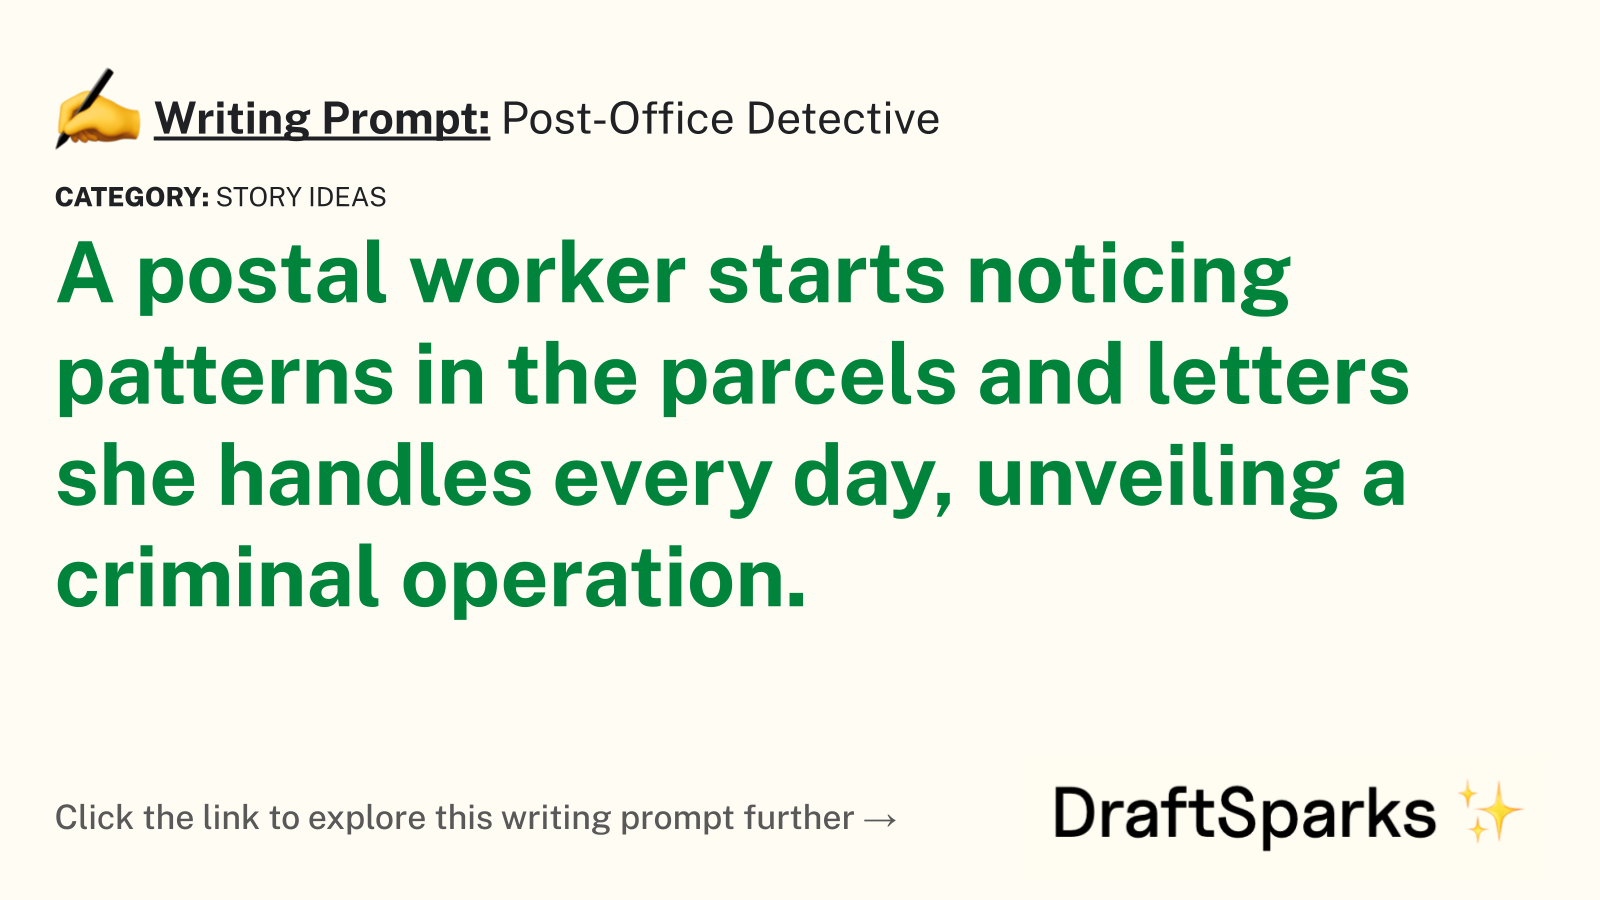 Post-Office Detective